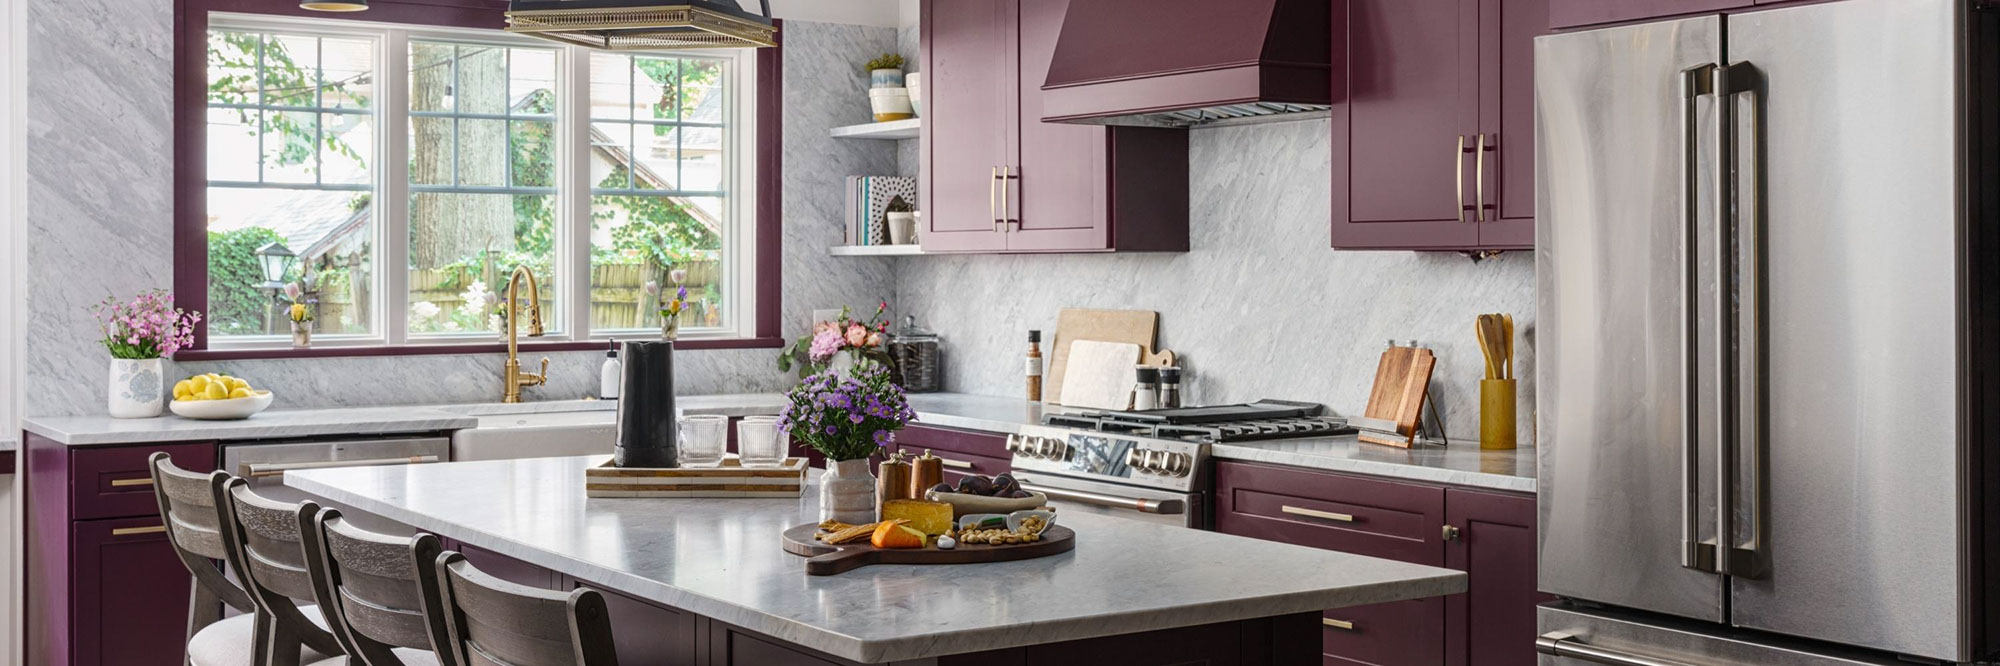 Renovated kitchen with plum-colored cabinets, gray marble backsplash and countertops, stainless steel appliances, and farm sink in front of three windows.